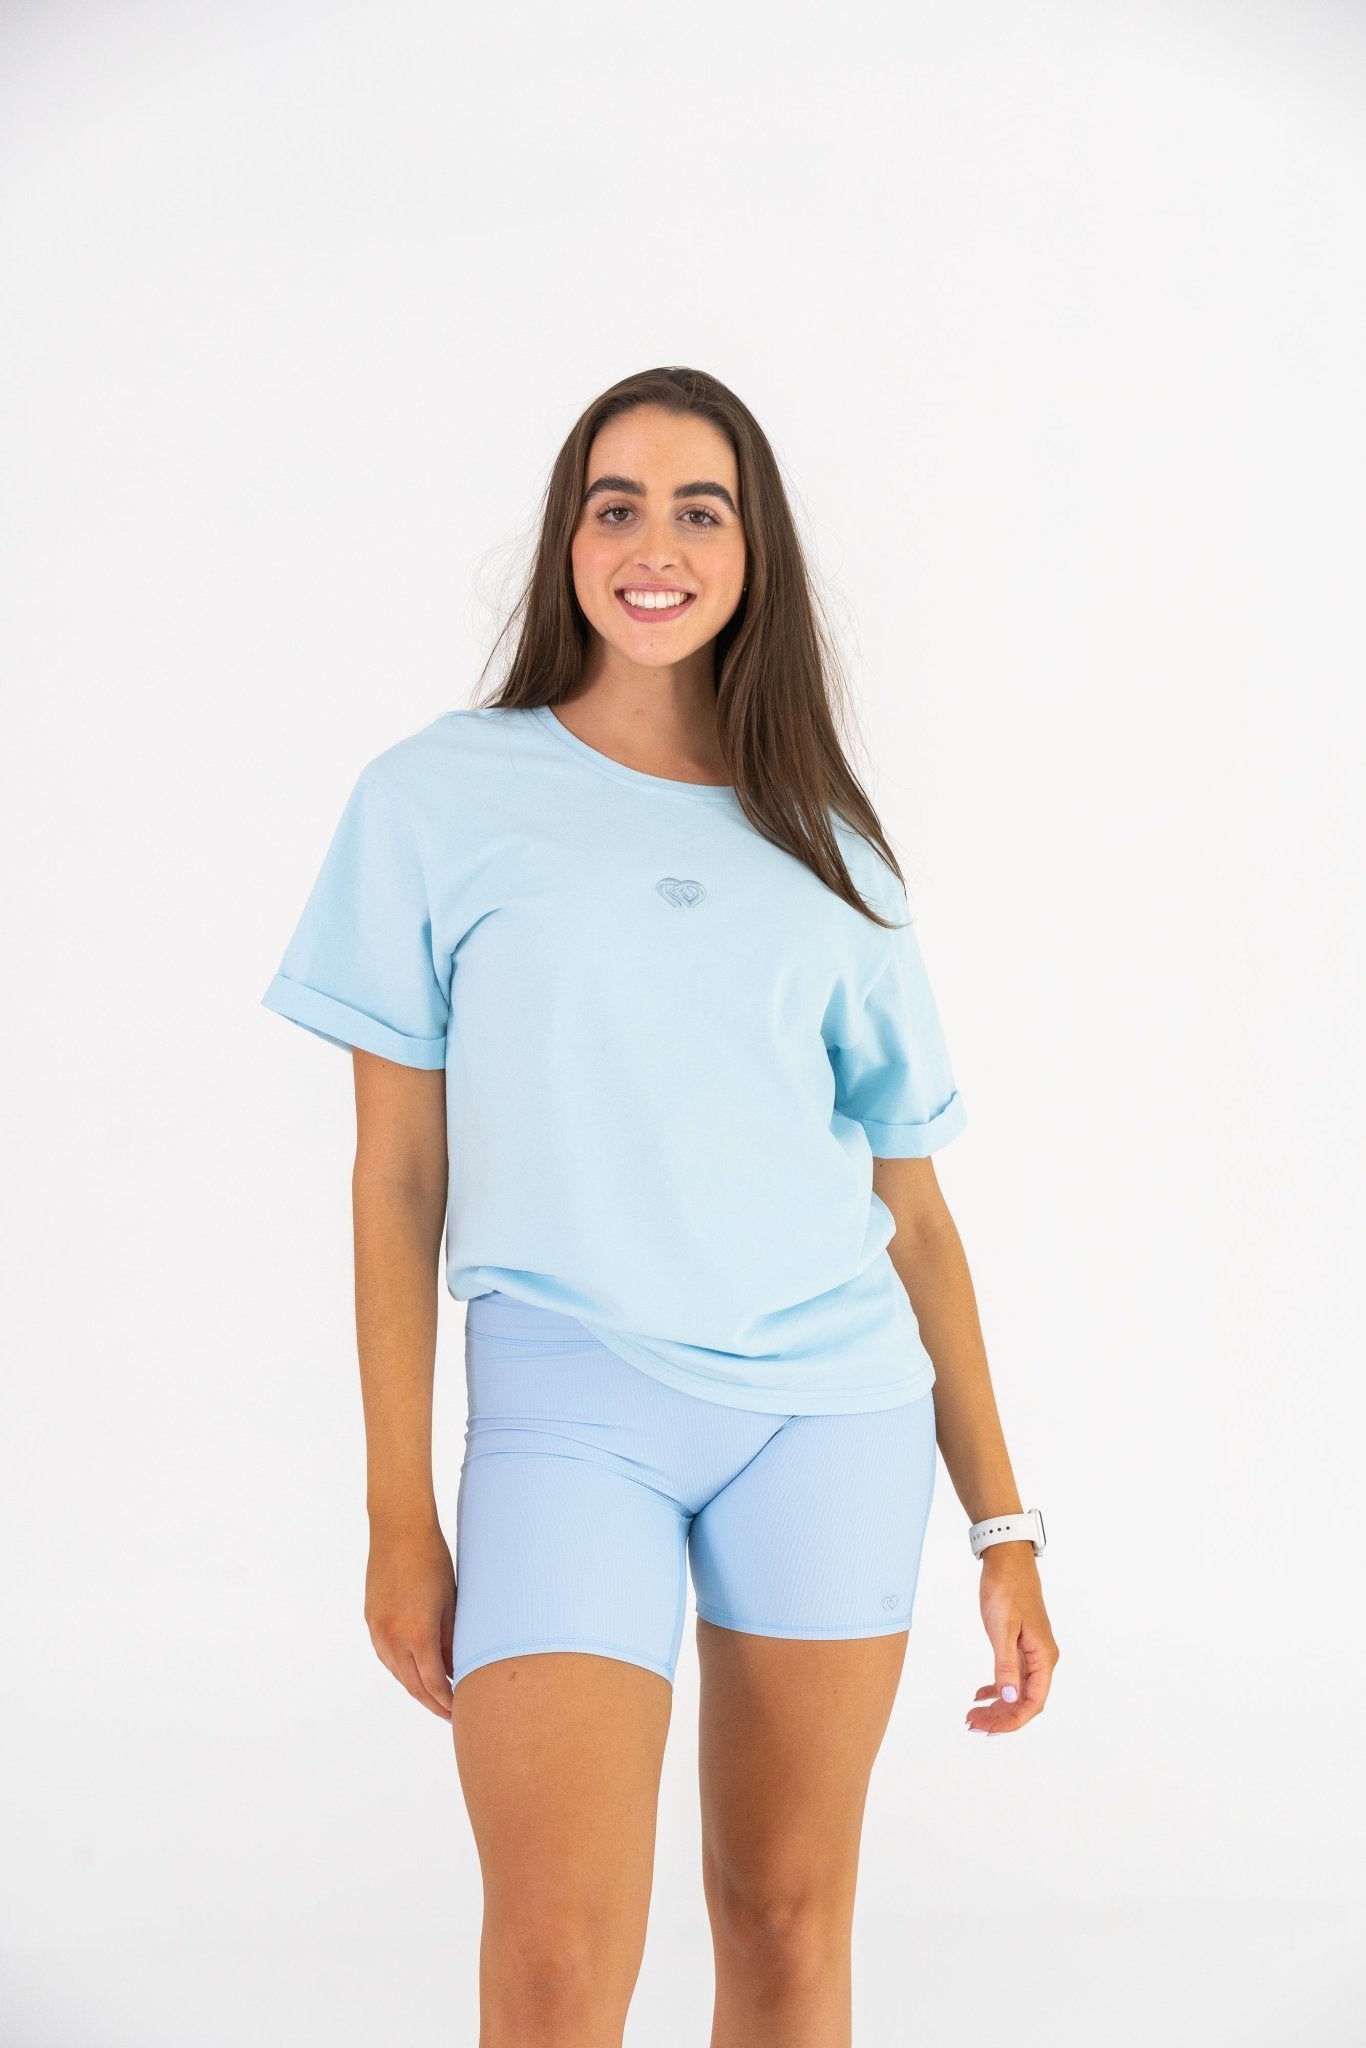 Cool Blue Oversized Tee - Claudia Dean World